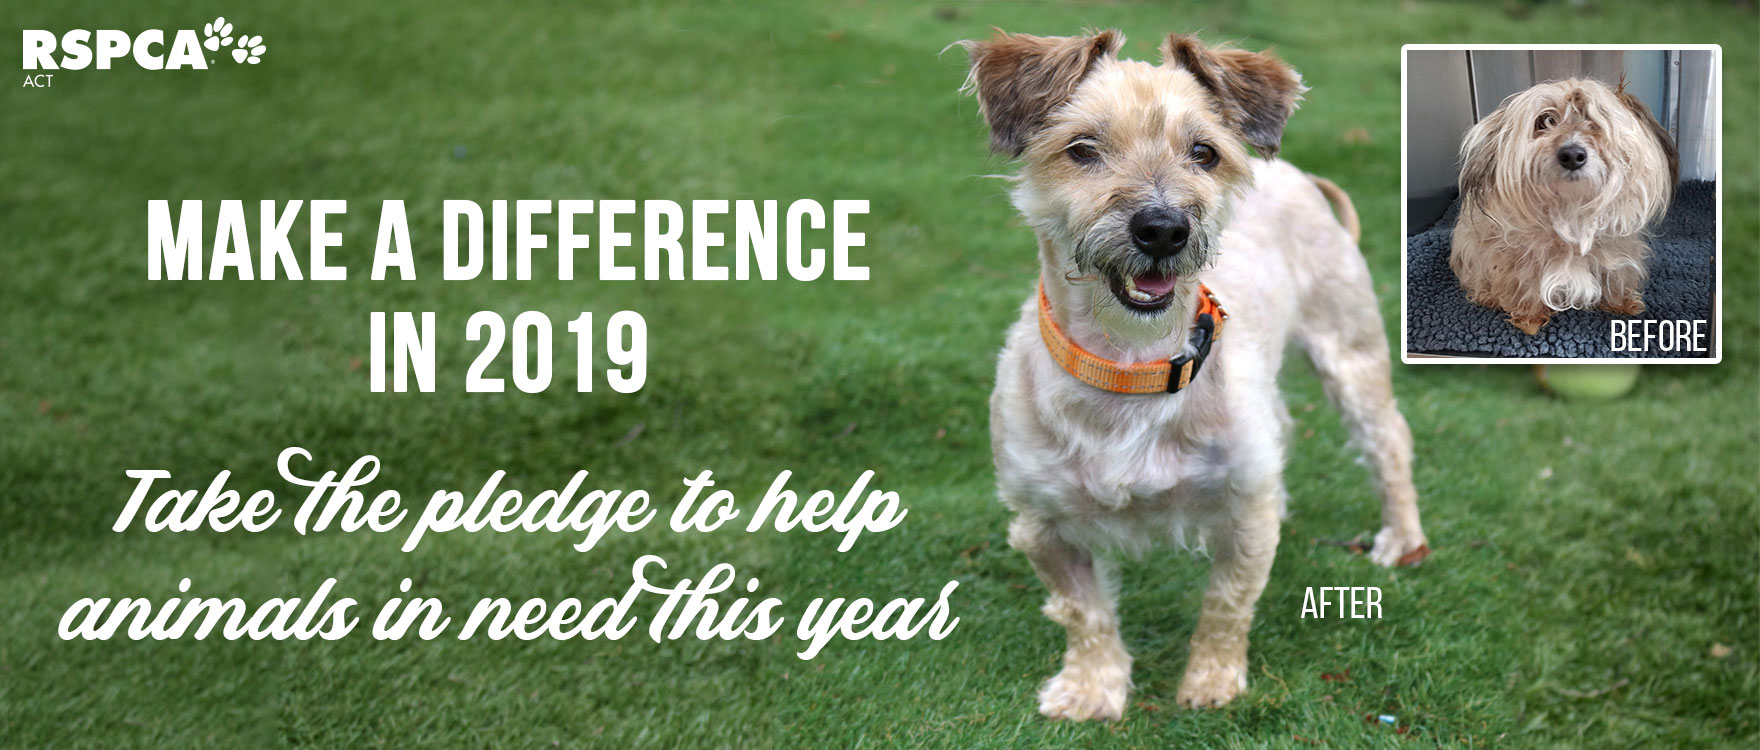 Make a difference in 2019